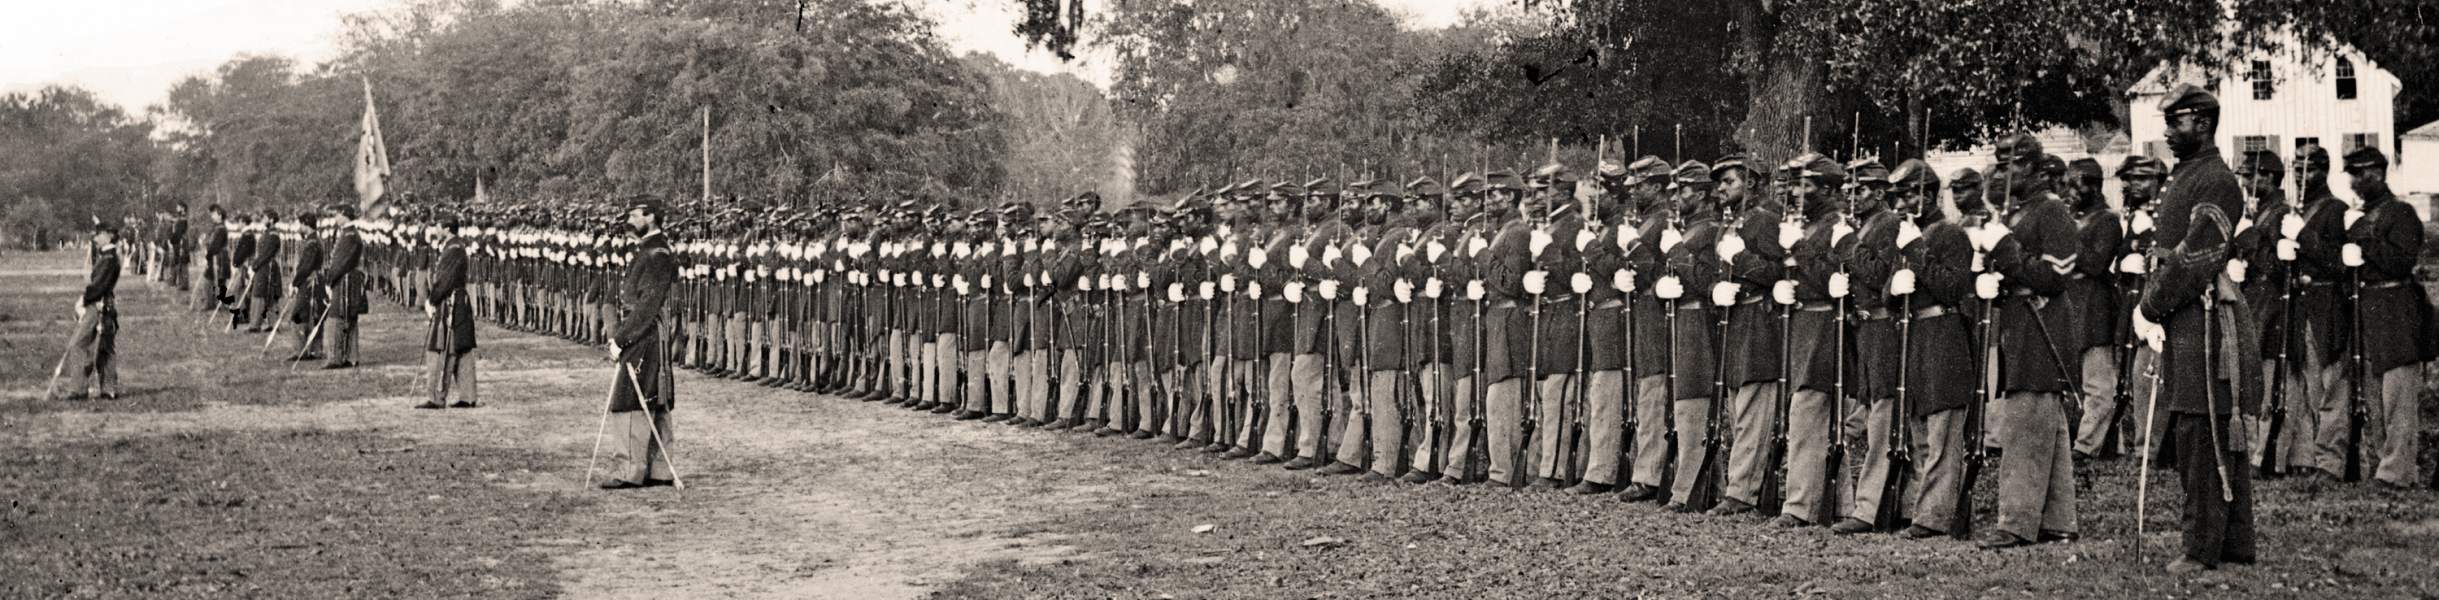 Twenty-Ninth (Colored) Connecticut Volunteer Infantry, Beaufort, South Carolina, Summer 1864, zoomable image